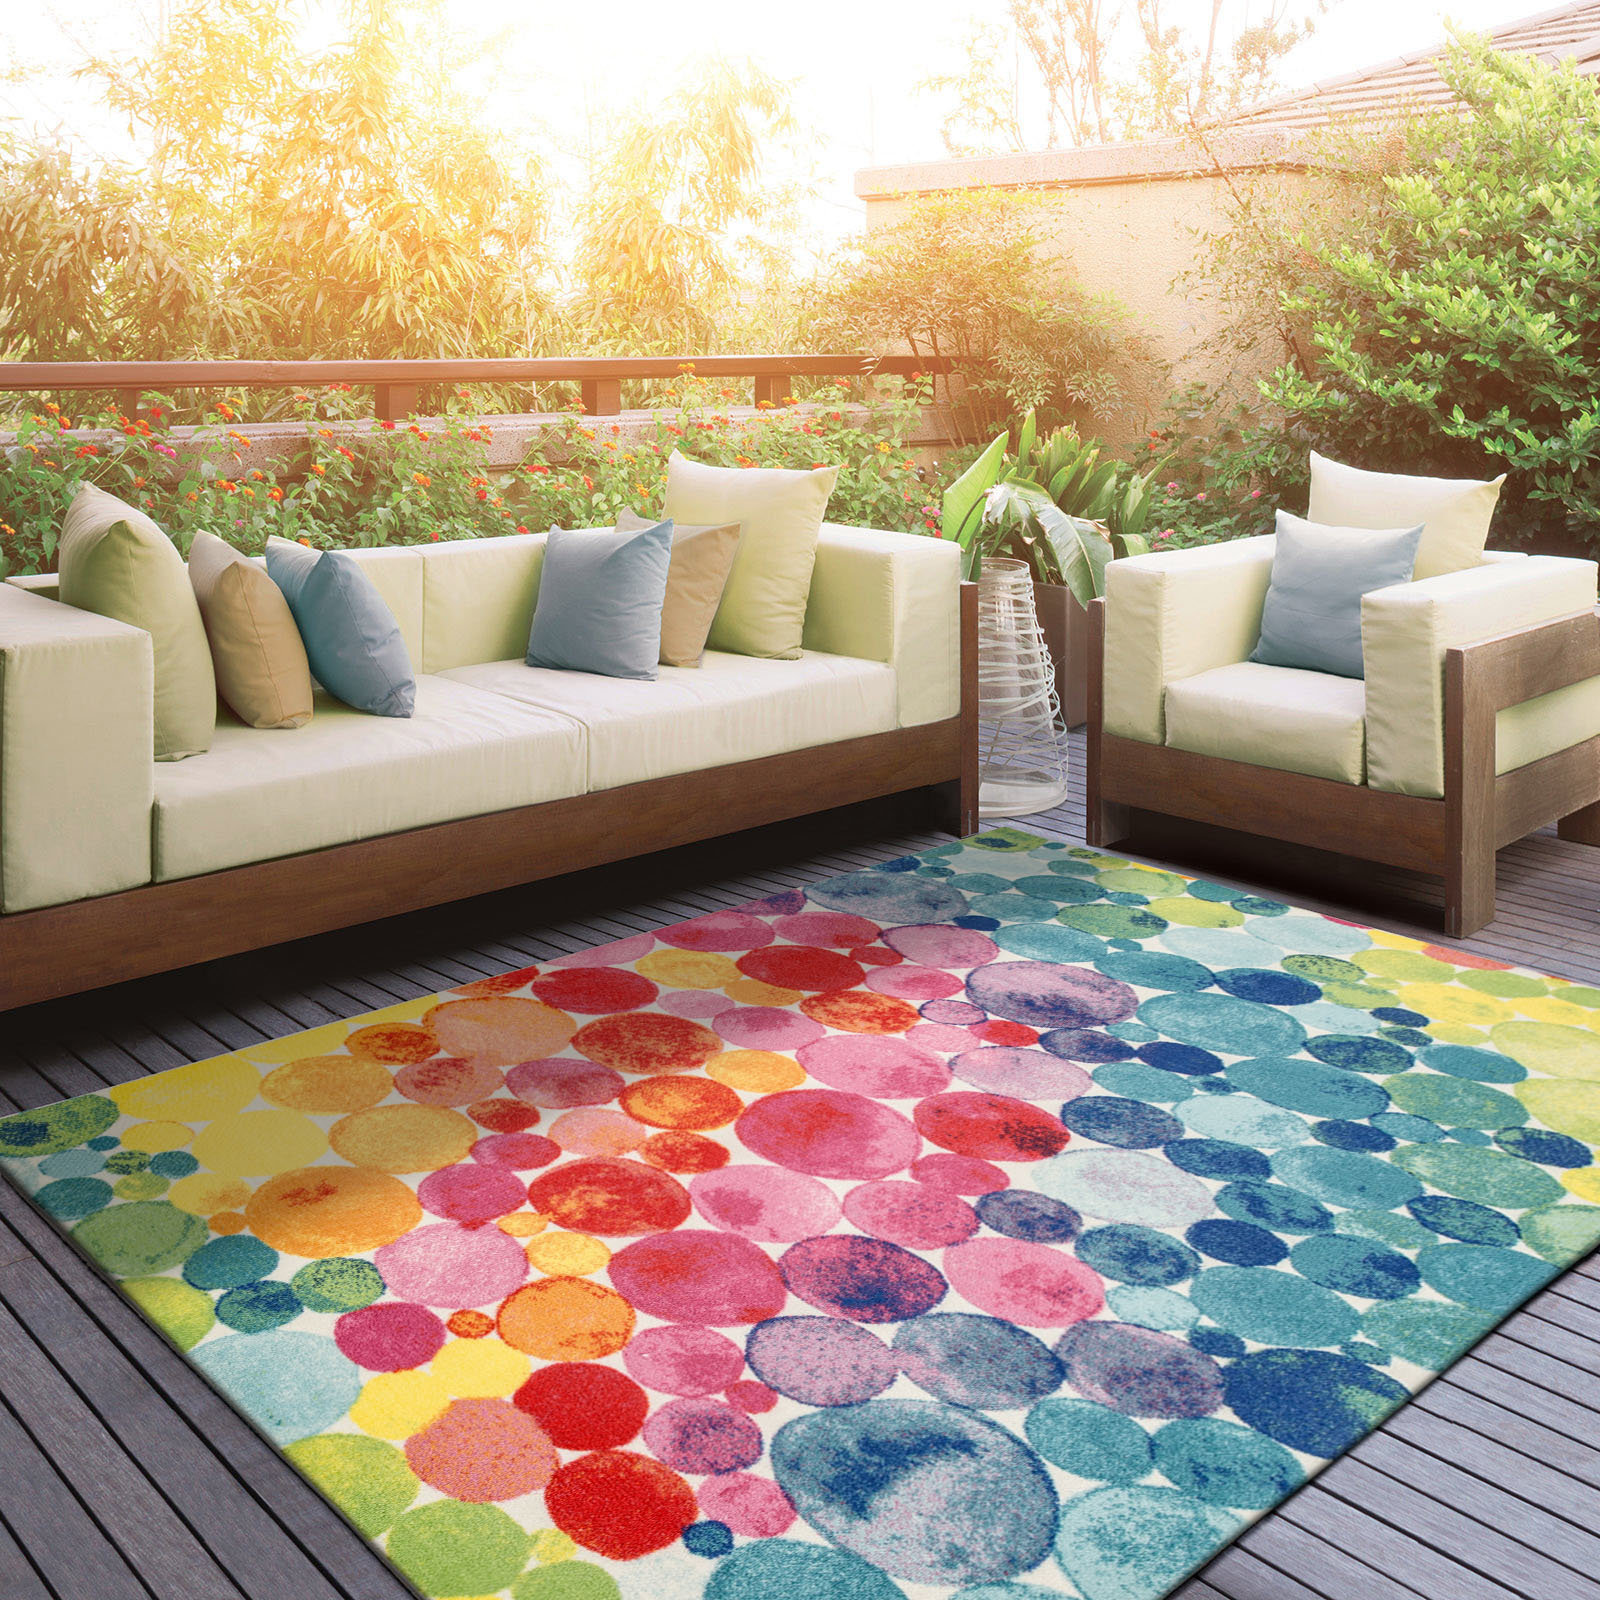 Fun Colourful Outdoor Rugs Large Weatherproof Easy Clean Washable Garden  Patio Area Mats 